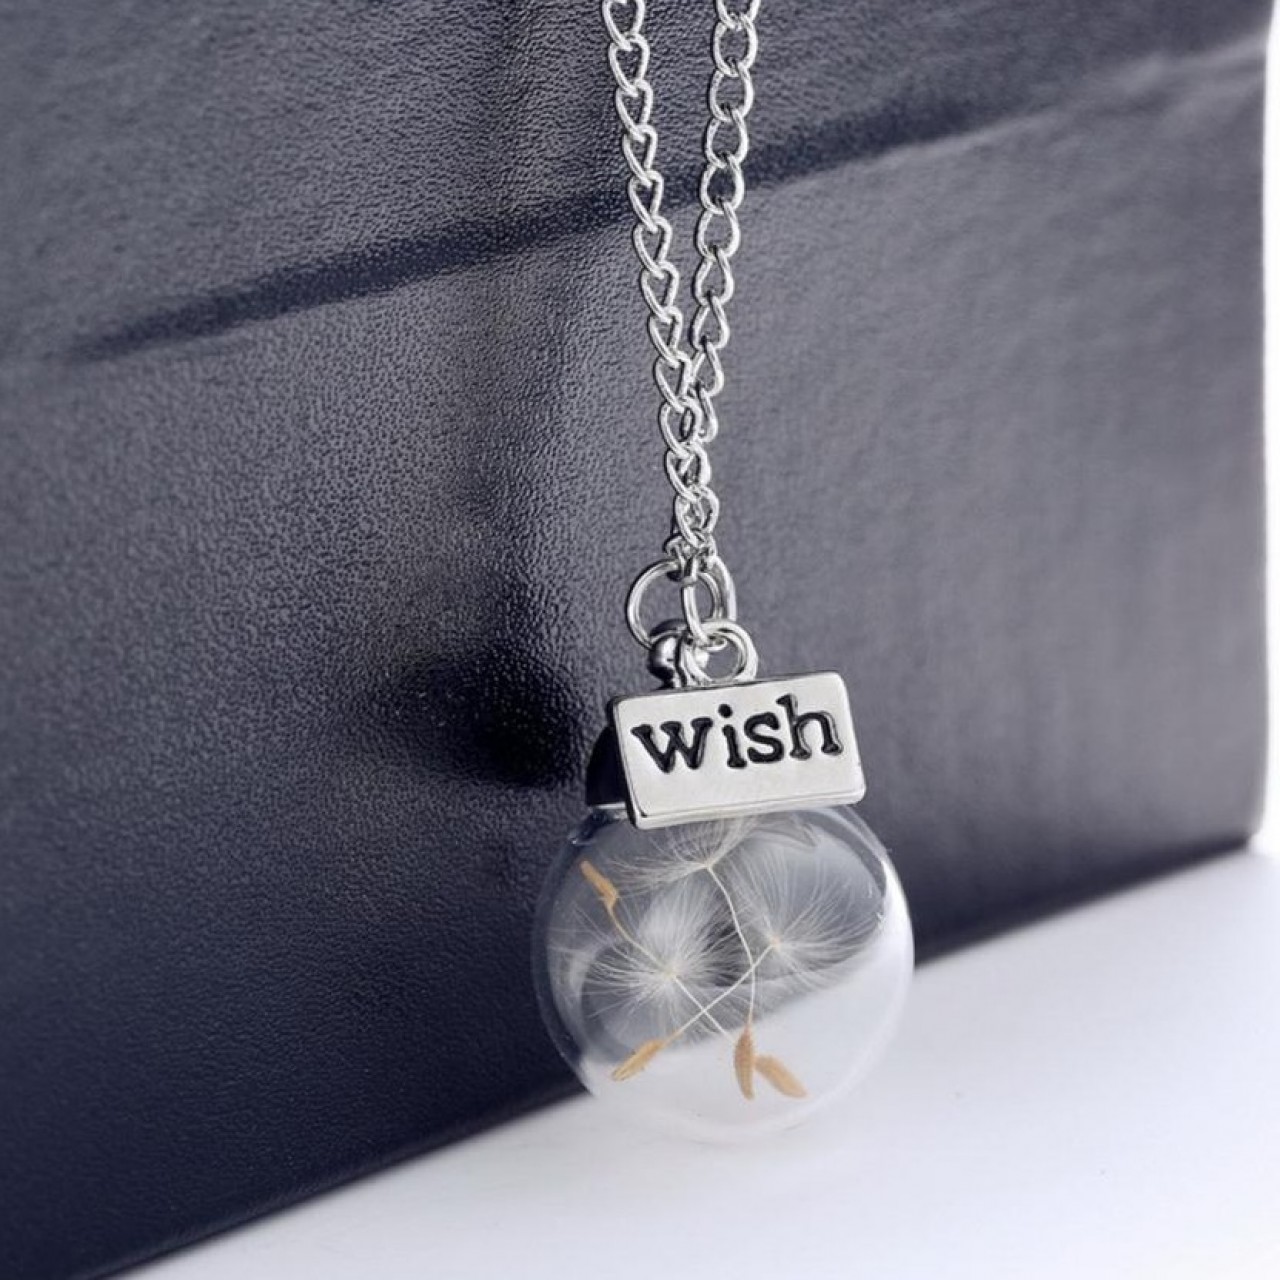 Wish Bottle Necklace for women